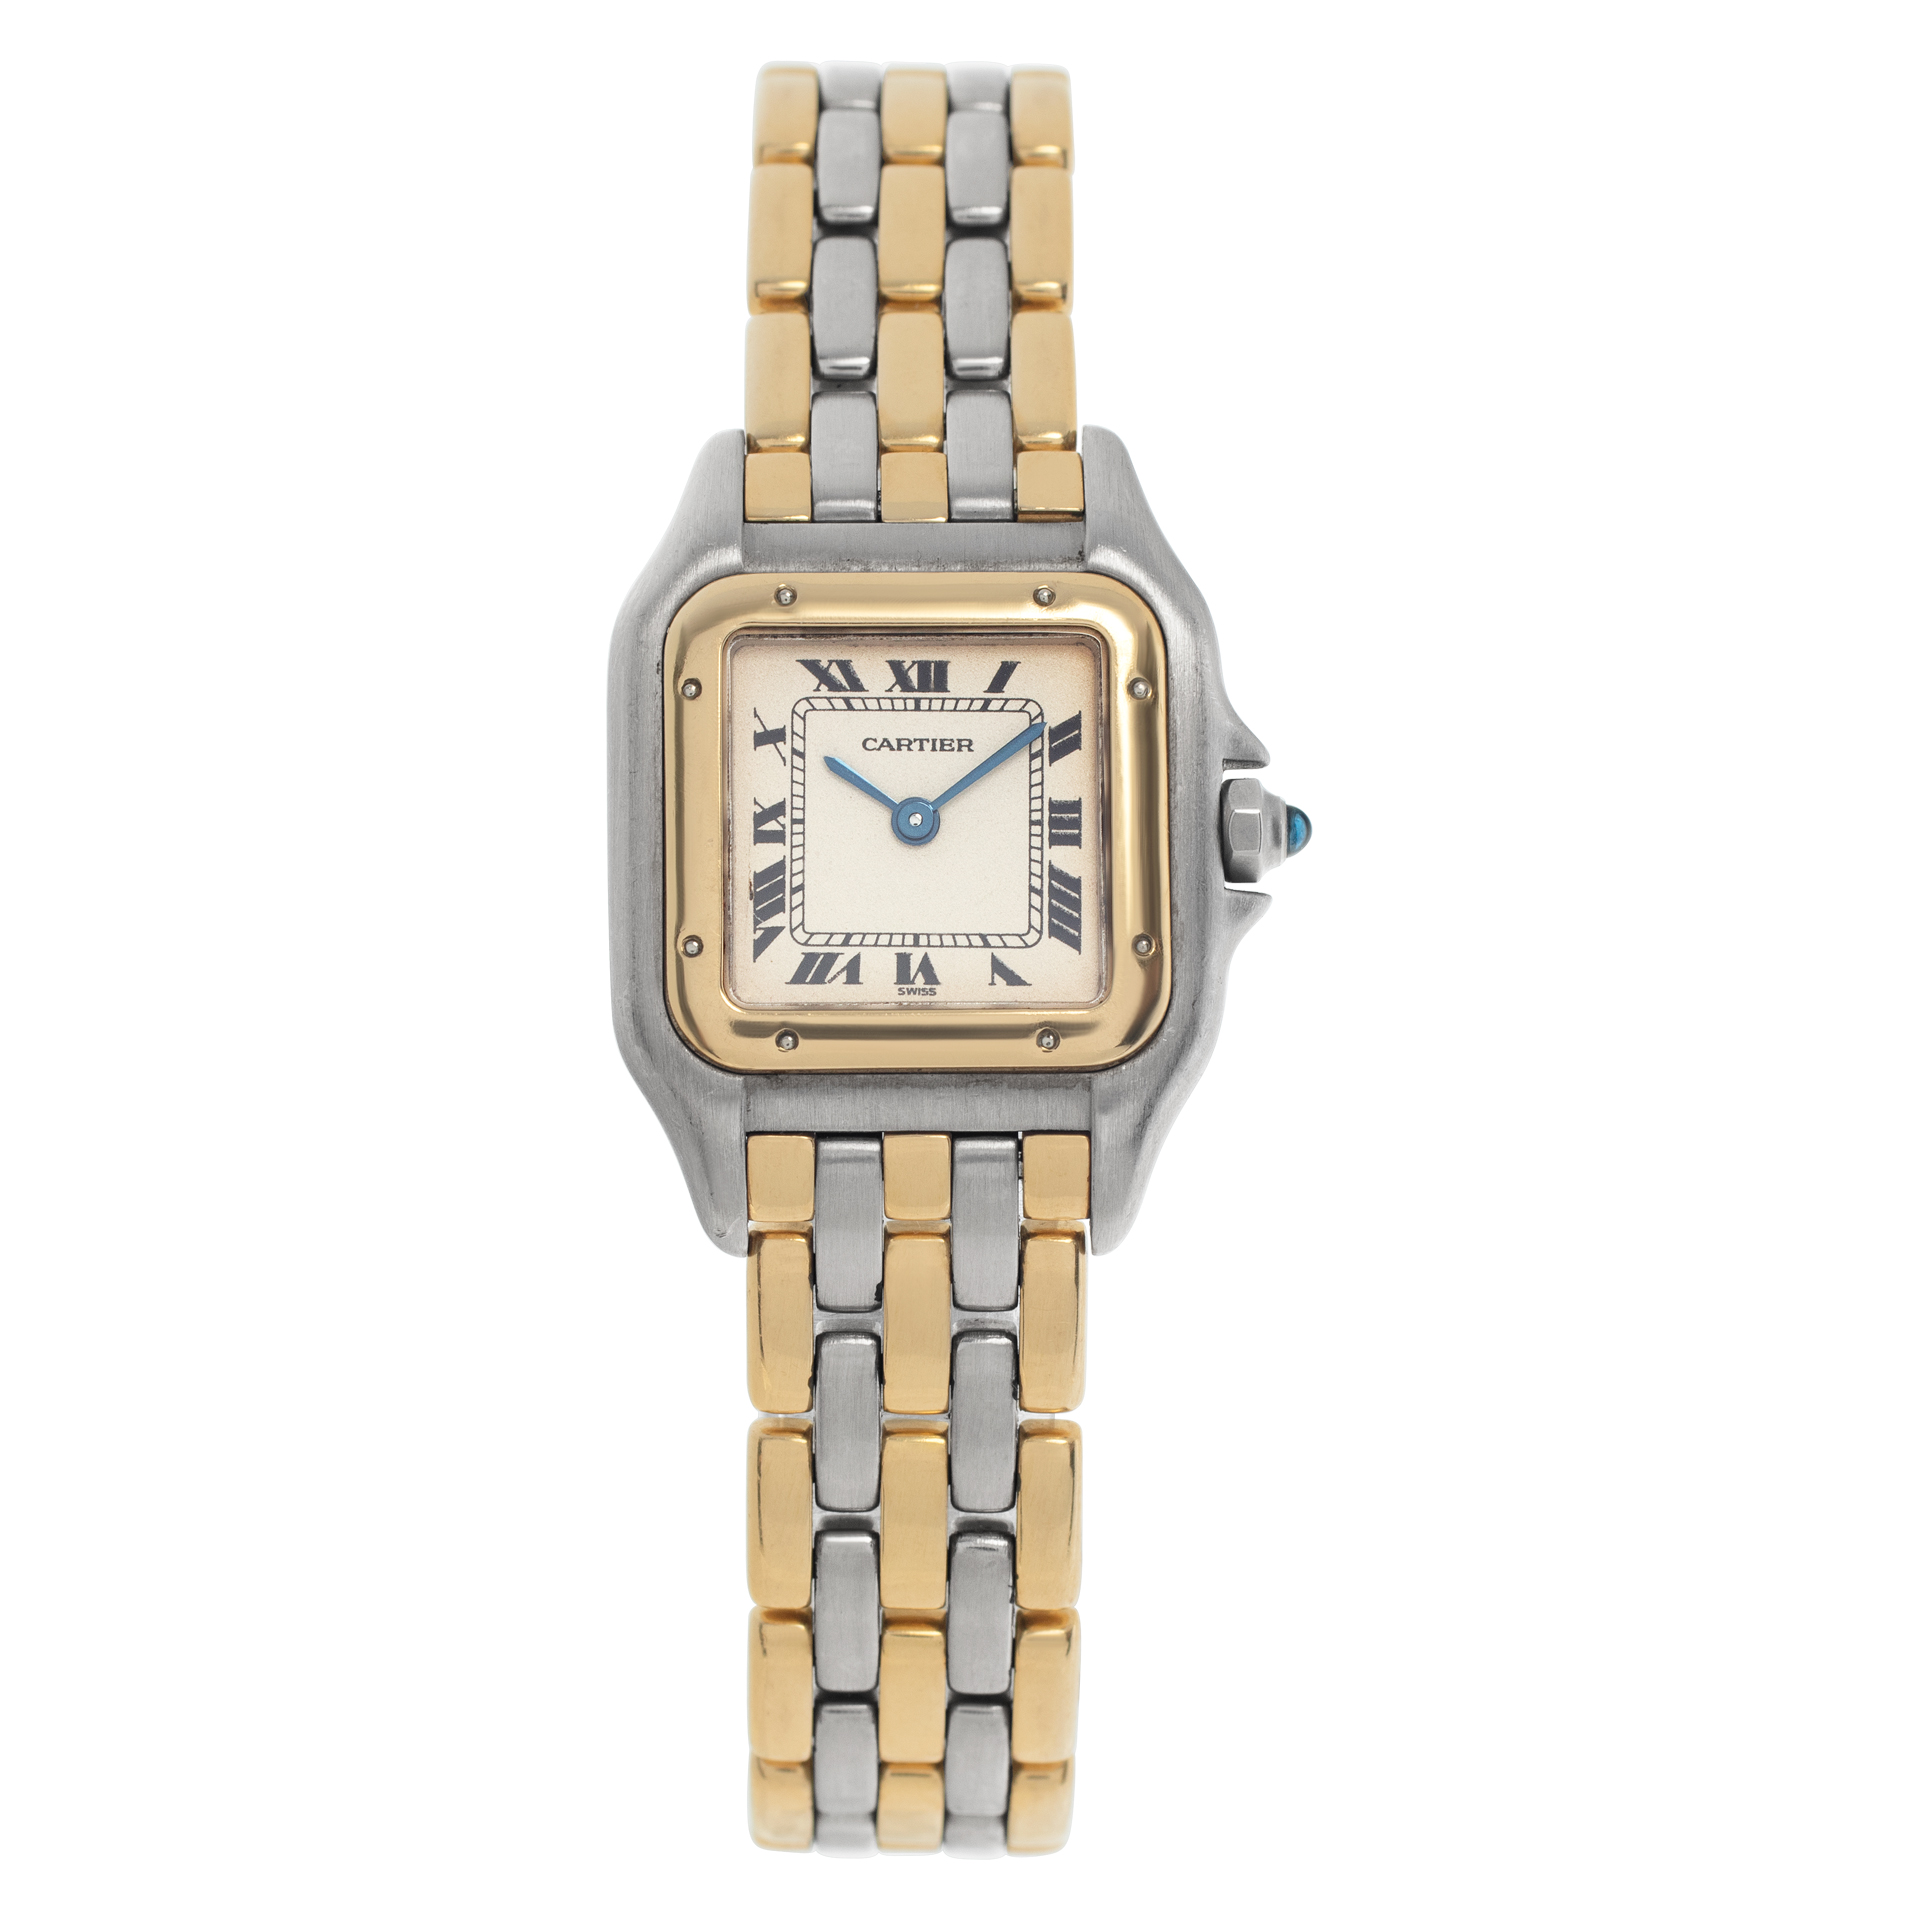 Cartier Panthere 22mm 166921 image 1